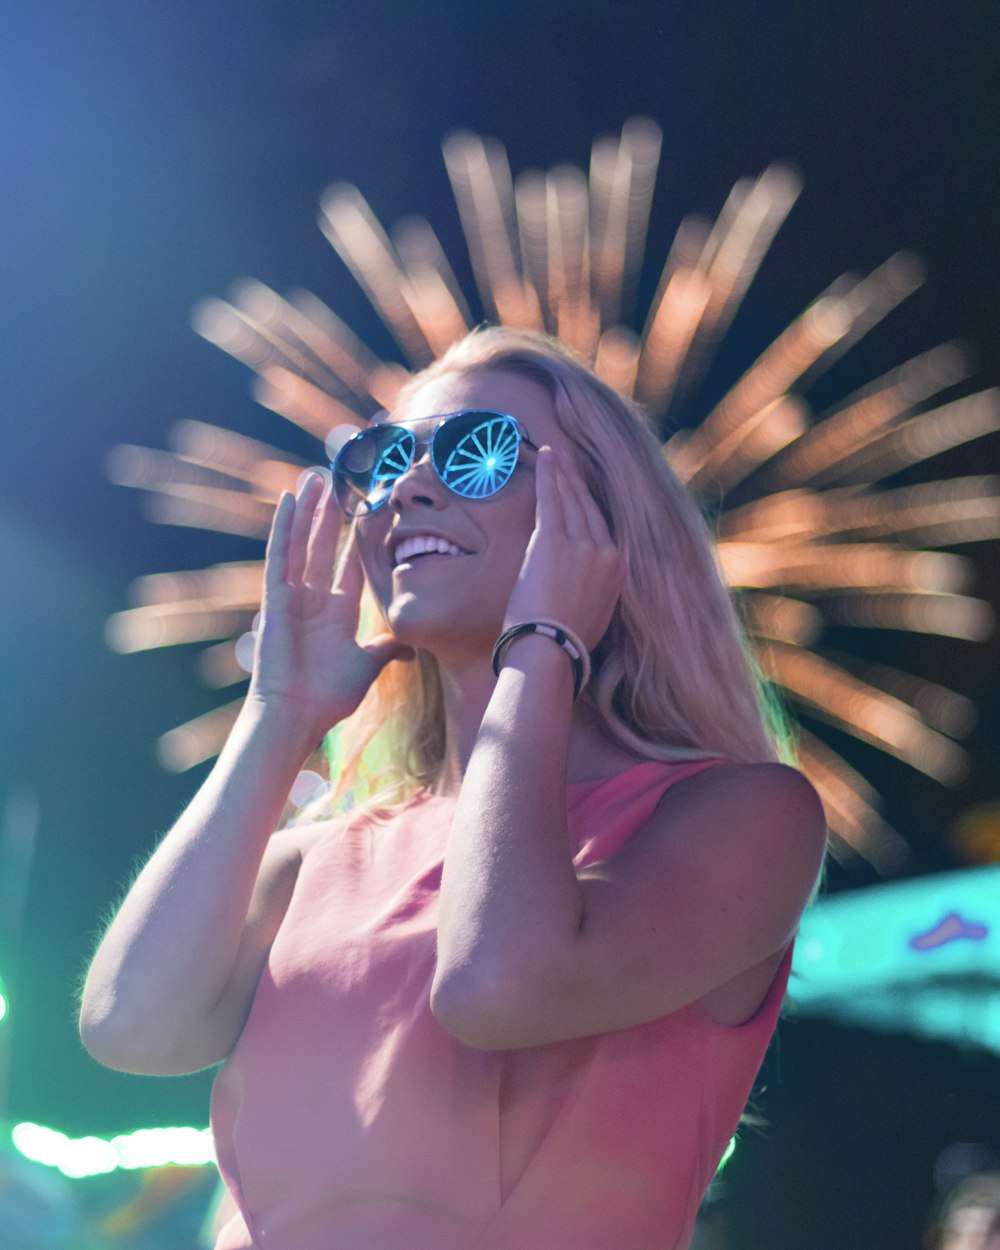 woman wearing sunglasses looking on fireworks during night time